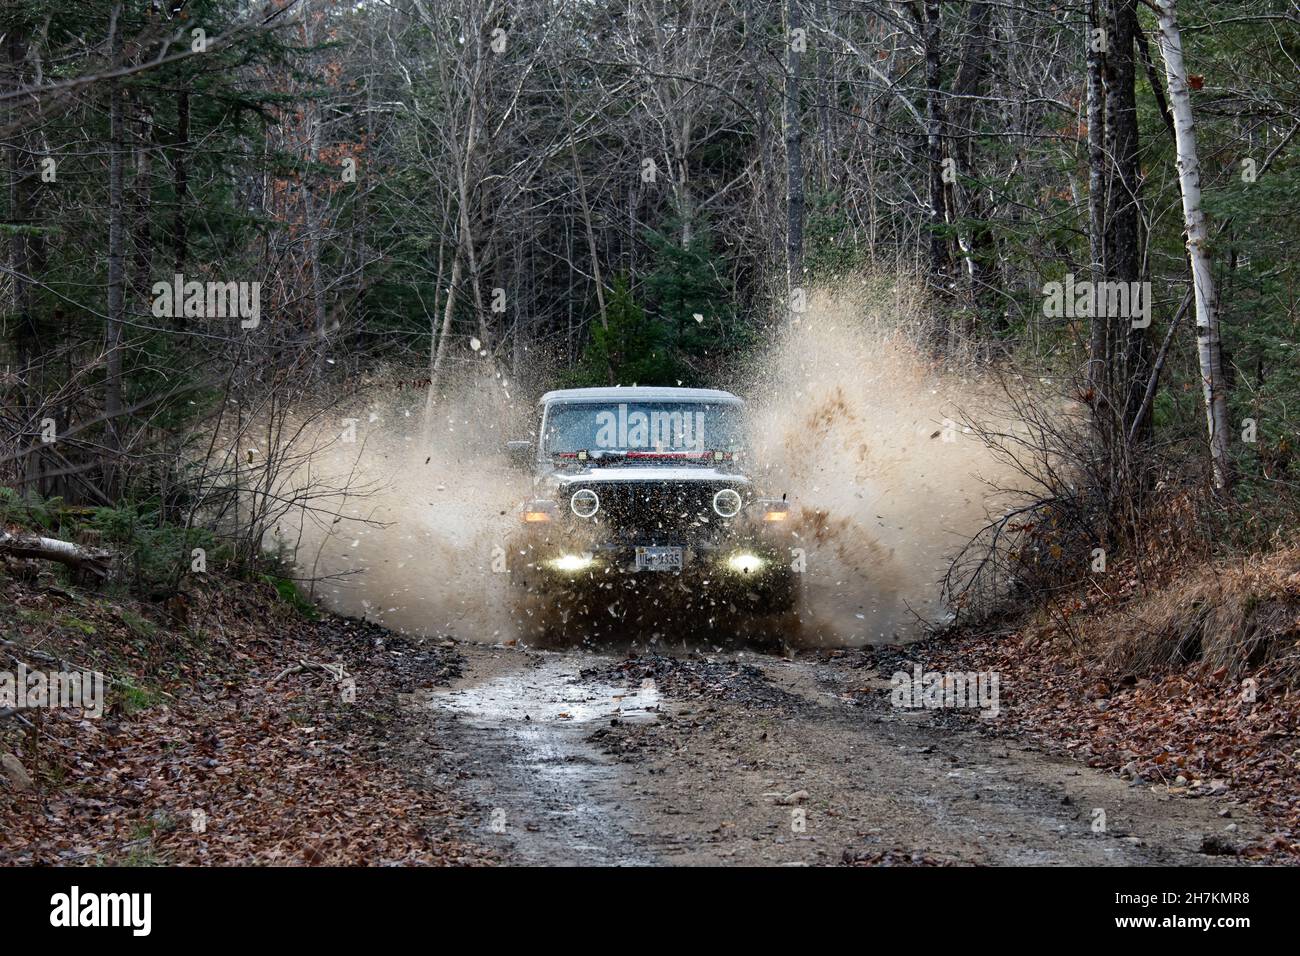 A Jeep Wrangler driving through a frozen mud puddle sending water and ice through the air on a logging road in the Adirondack Mountains, NY Stock Photo